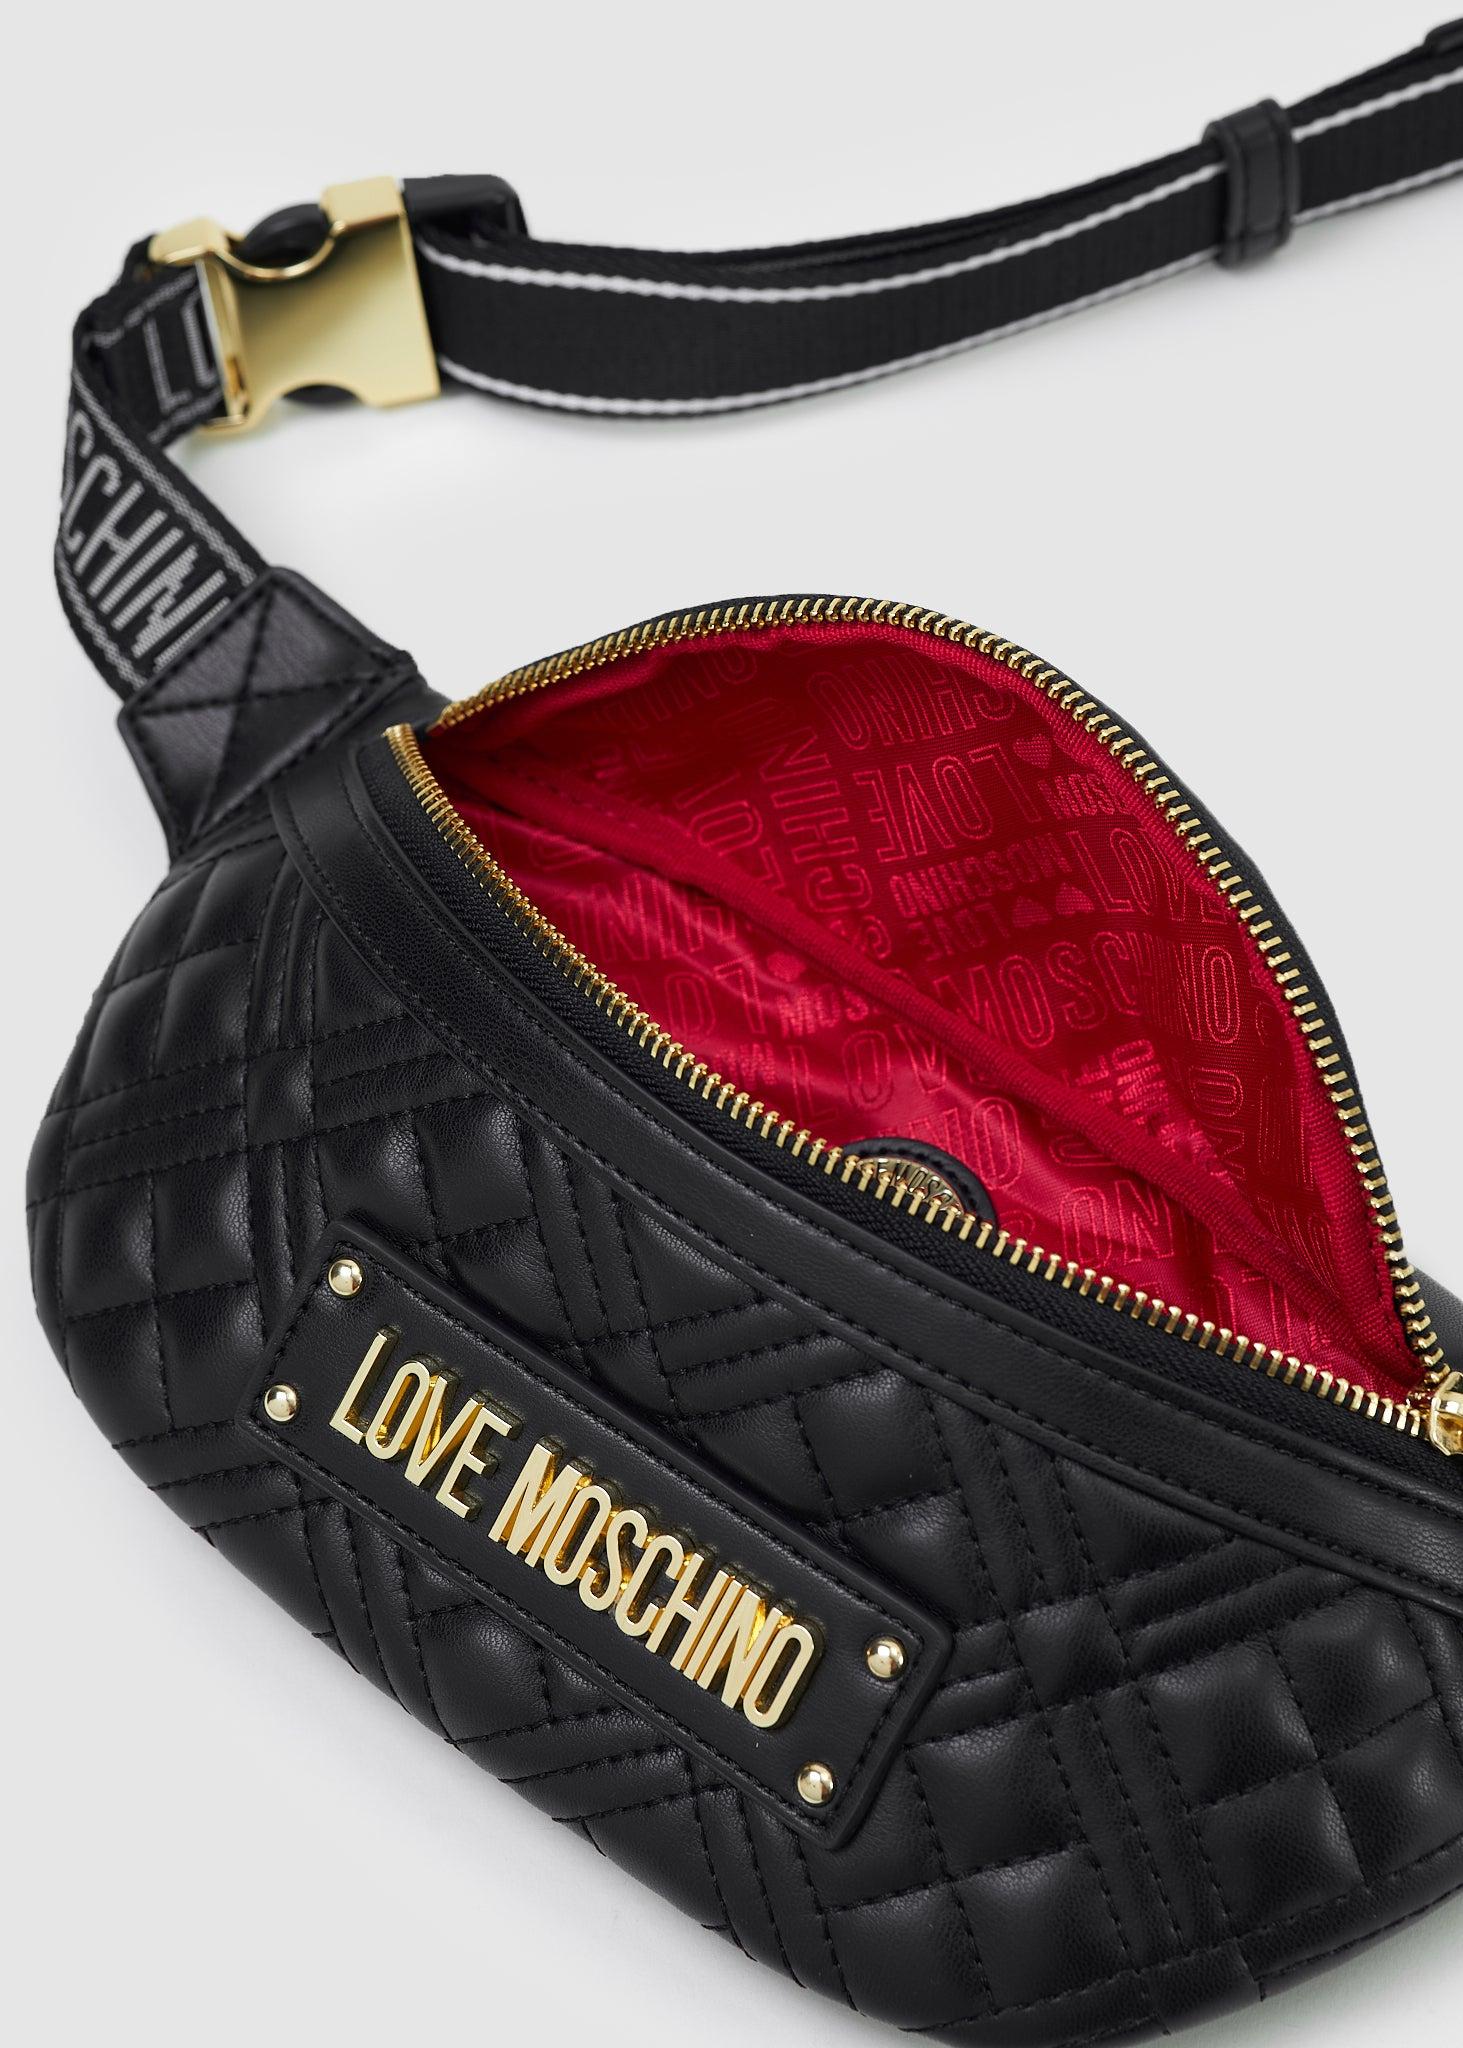 Love Moschino Quilted Belt Bag With Gold Logo in Black | Lyst